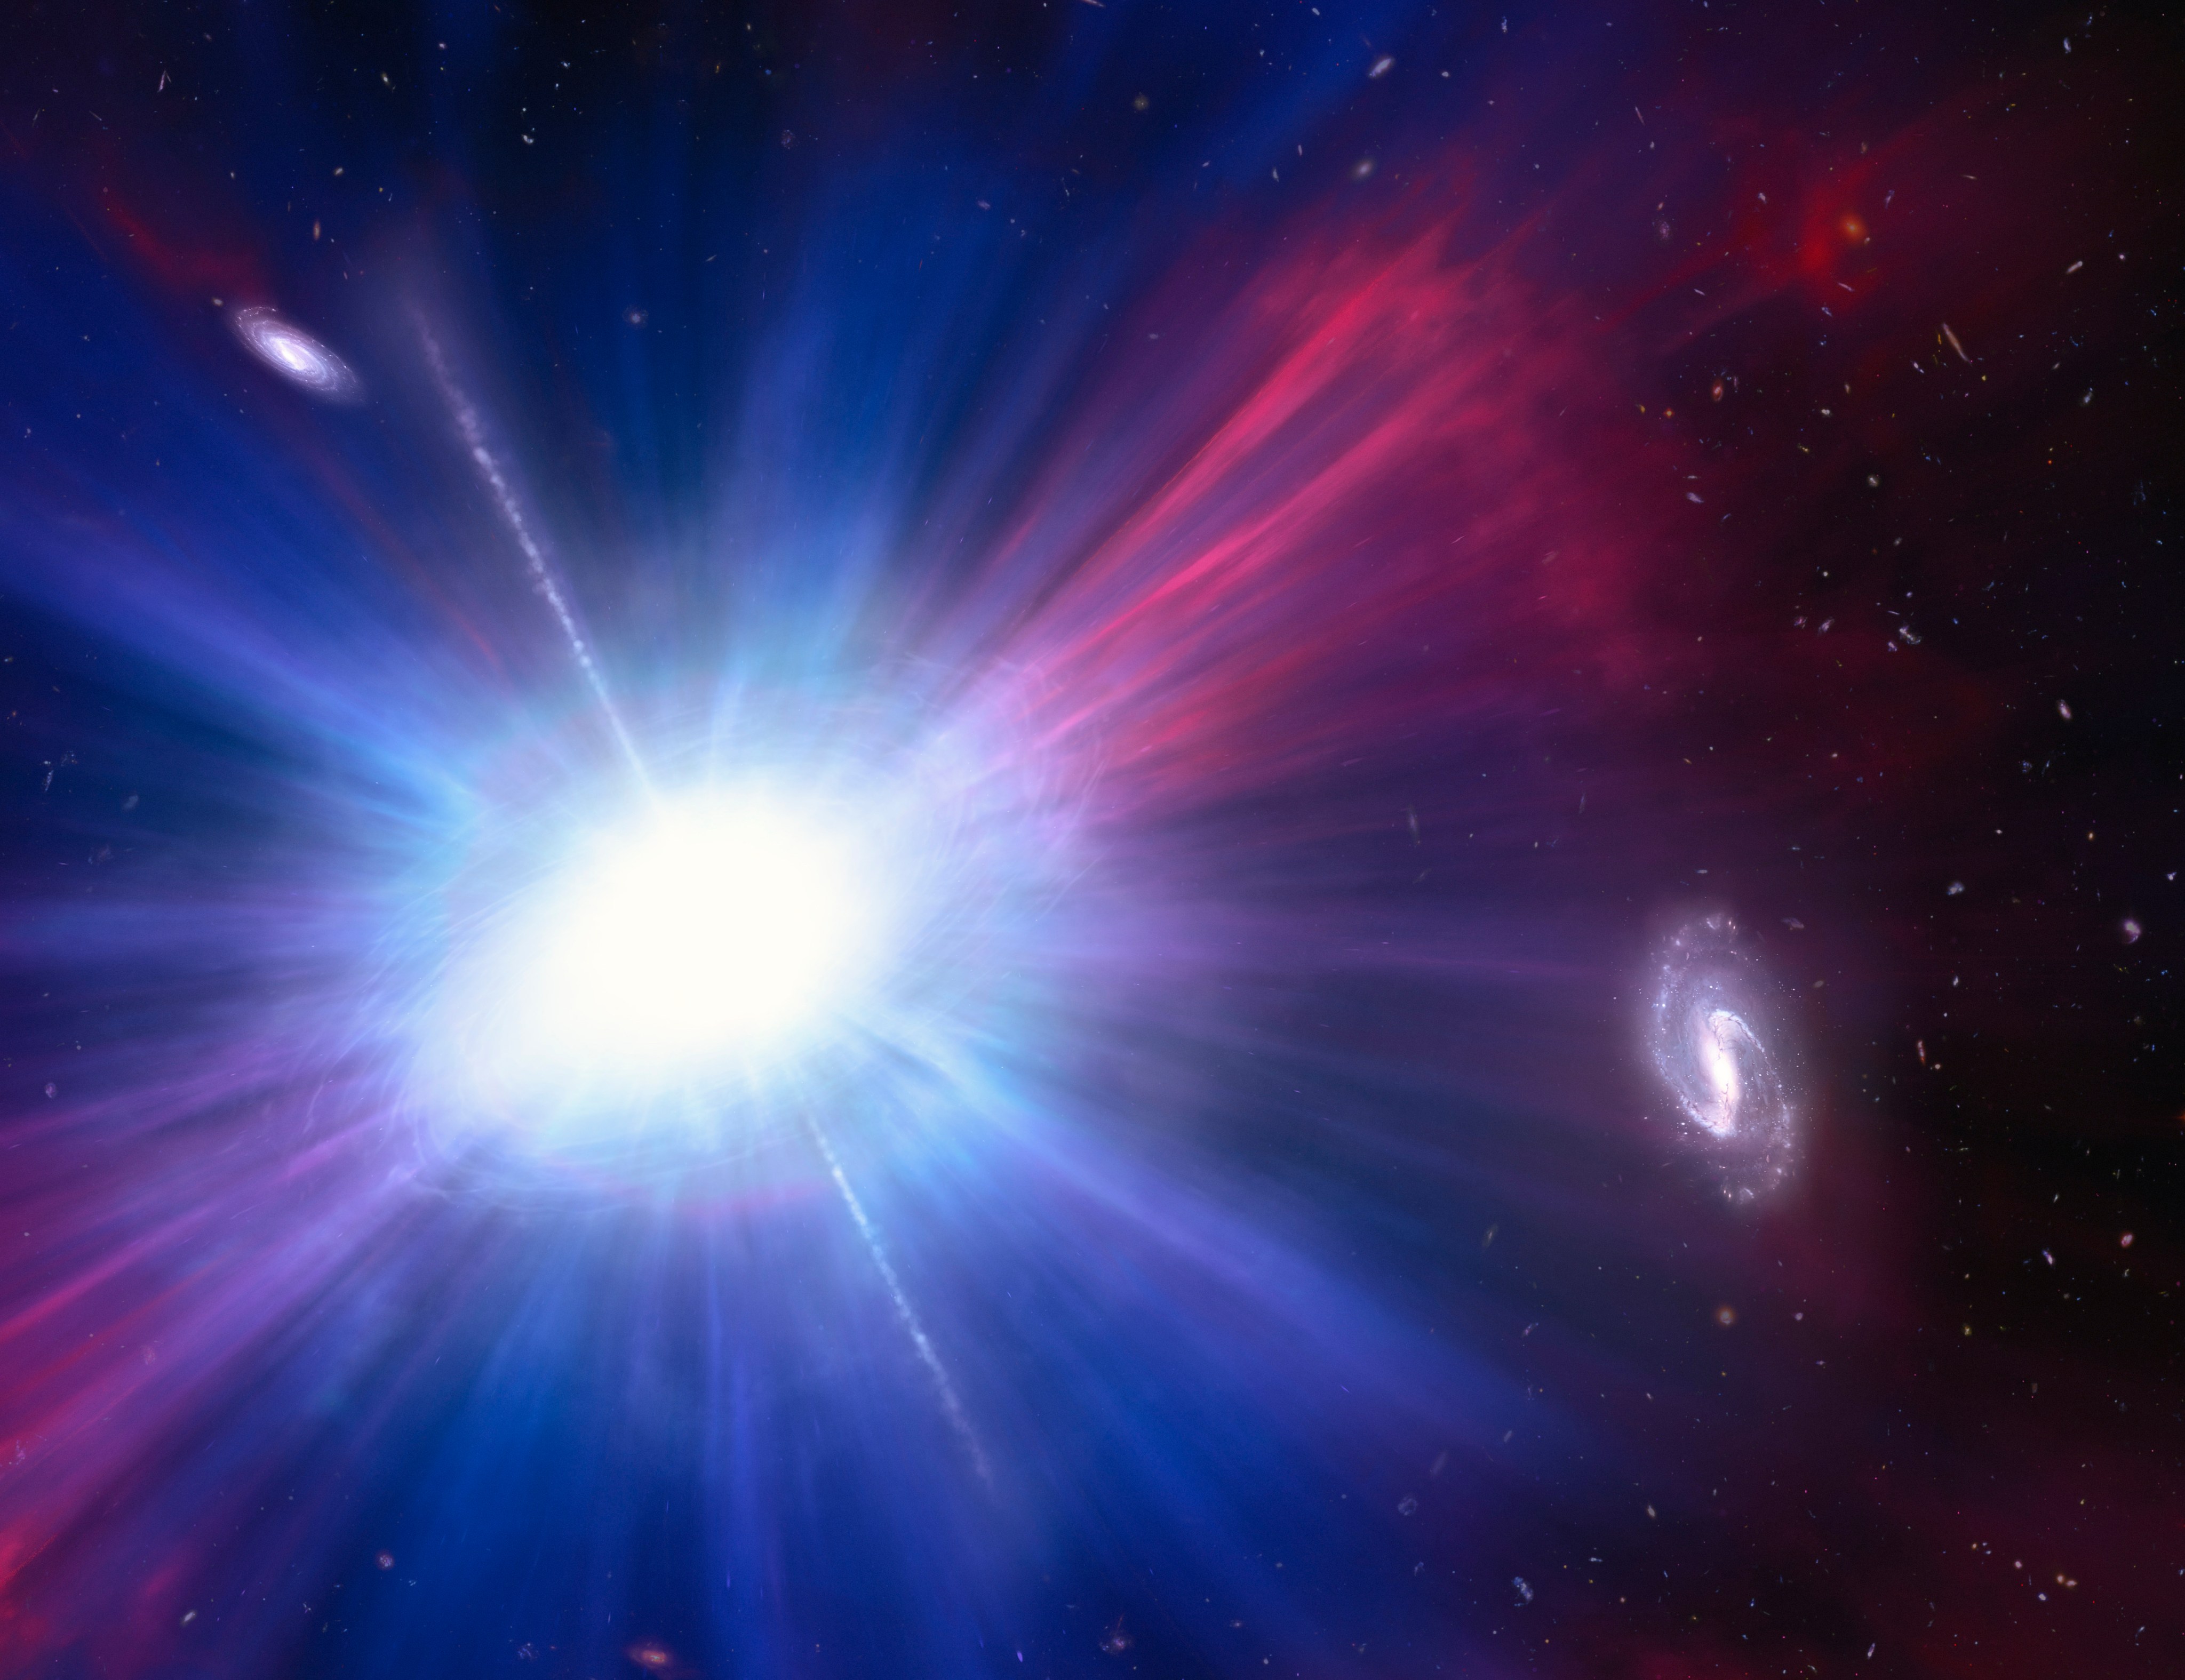 Illustration of one of brightest explosions ever seen in space. Called a Luminous Fast Blue Optical Transient (LFBOT), it shines intensely in blue light. It appears as a bright white blob left of center where blue-white and red rays sprout out from it. Toward the right of the image there is a spiral galaxy. To the upper left is another whitish galaxy shaped like a cigar. The LFBOT doesn’t seem to be associated with either galaxy.